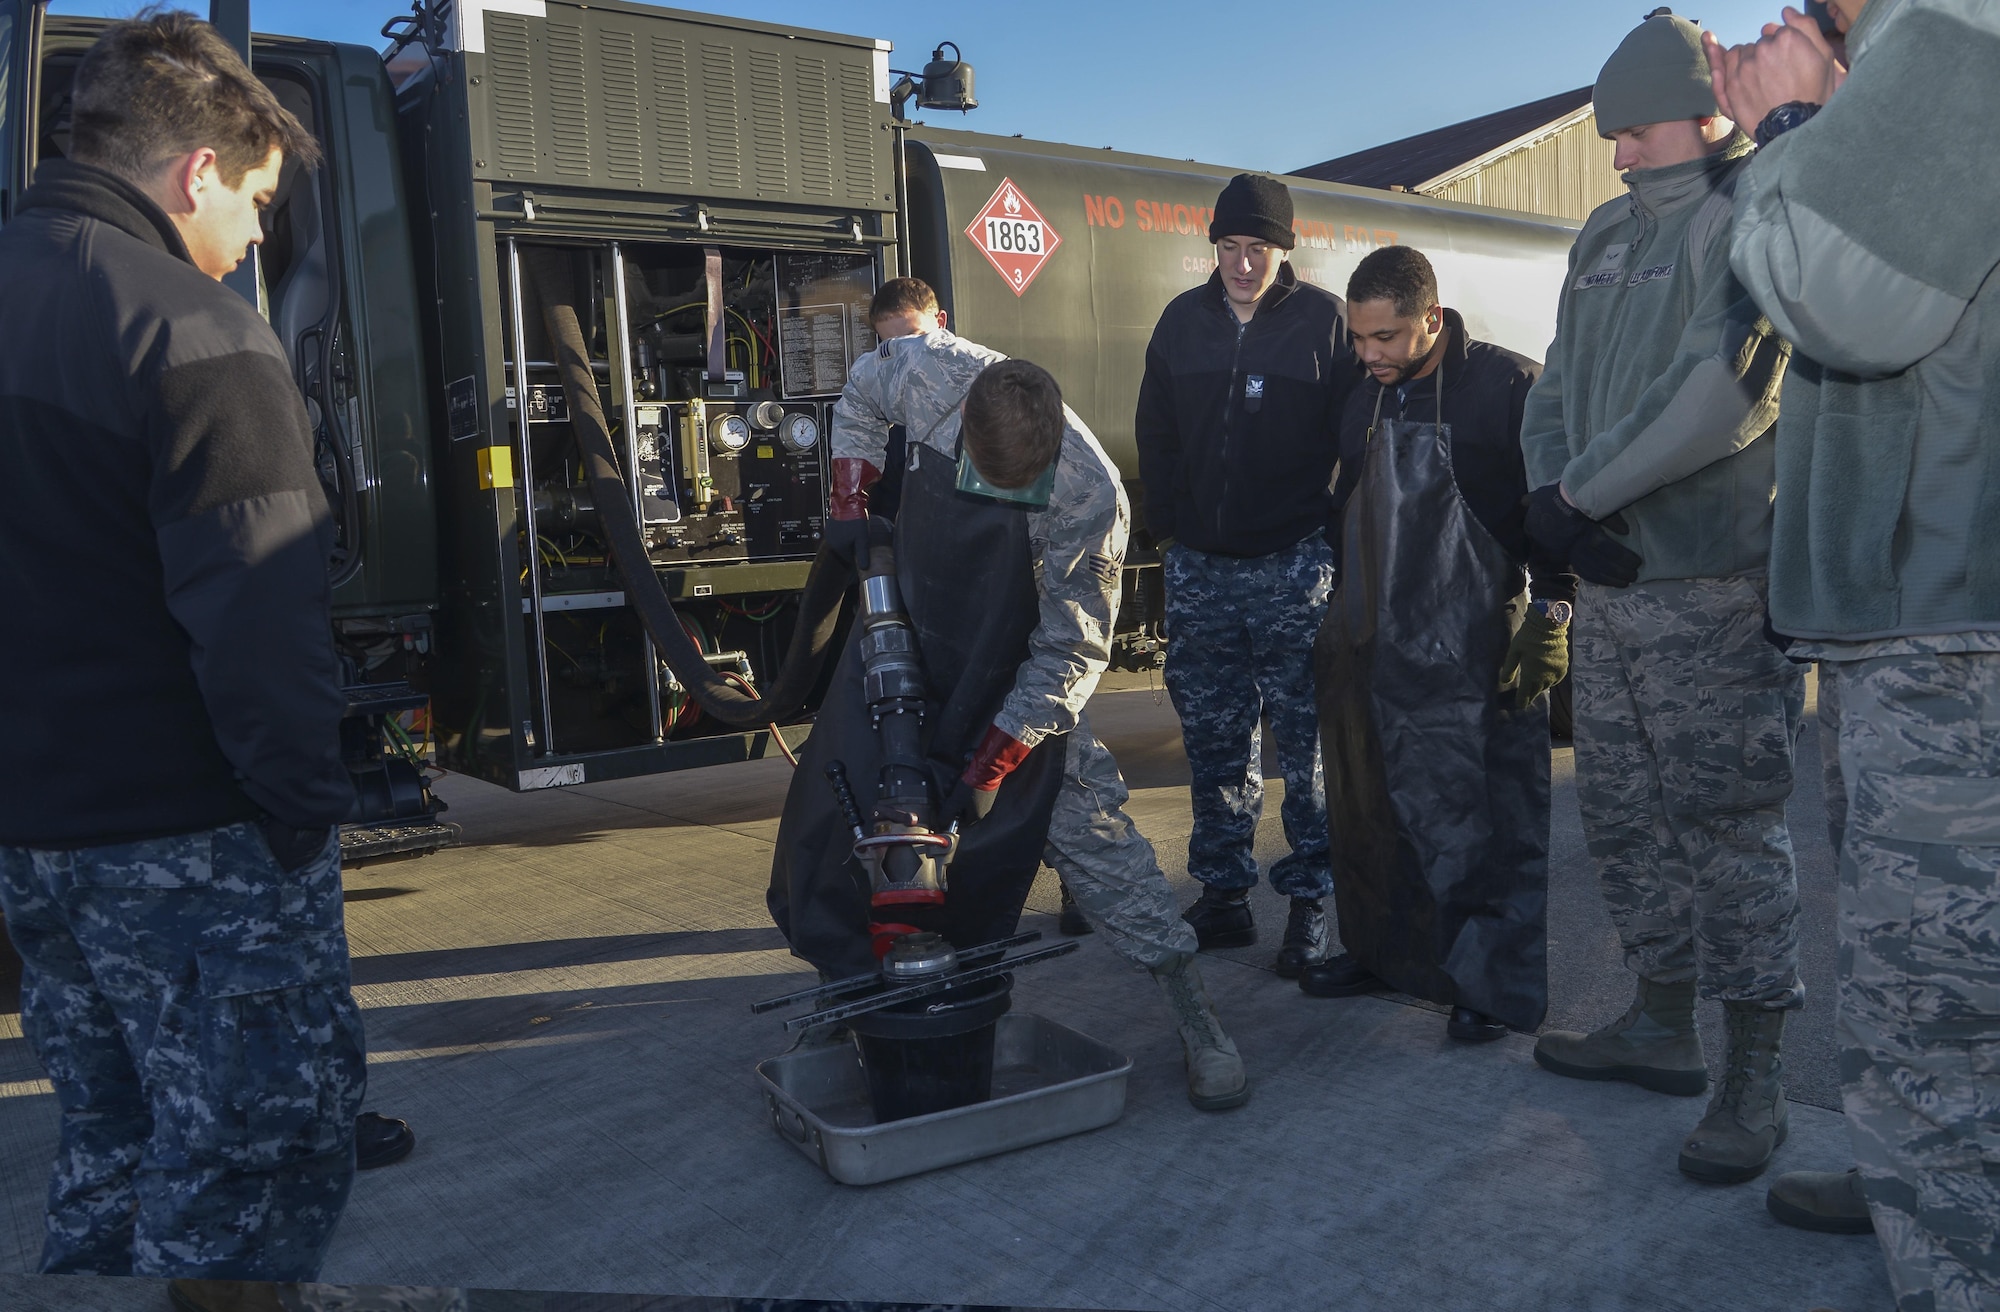 Senior Airman Tyler Sims, a 374th Logistics Readiness Squadron Fuels Management Flight fuels training supervisor, shows Sailors from Naval Air Facility Atsugi how to properly remove a fuel hose nozzle at Yokota Air Base, Japan, Jan. 26, 2016. The training allowed members to be prepared to support U.S. Navy aircraft at Andersen Air Force Base, Guam, during exercise Cope North. (U.S. Air Force photo/Senior Airman David Owsianka)